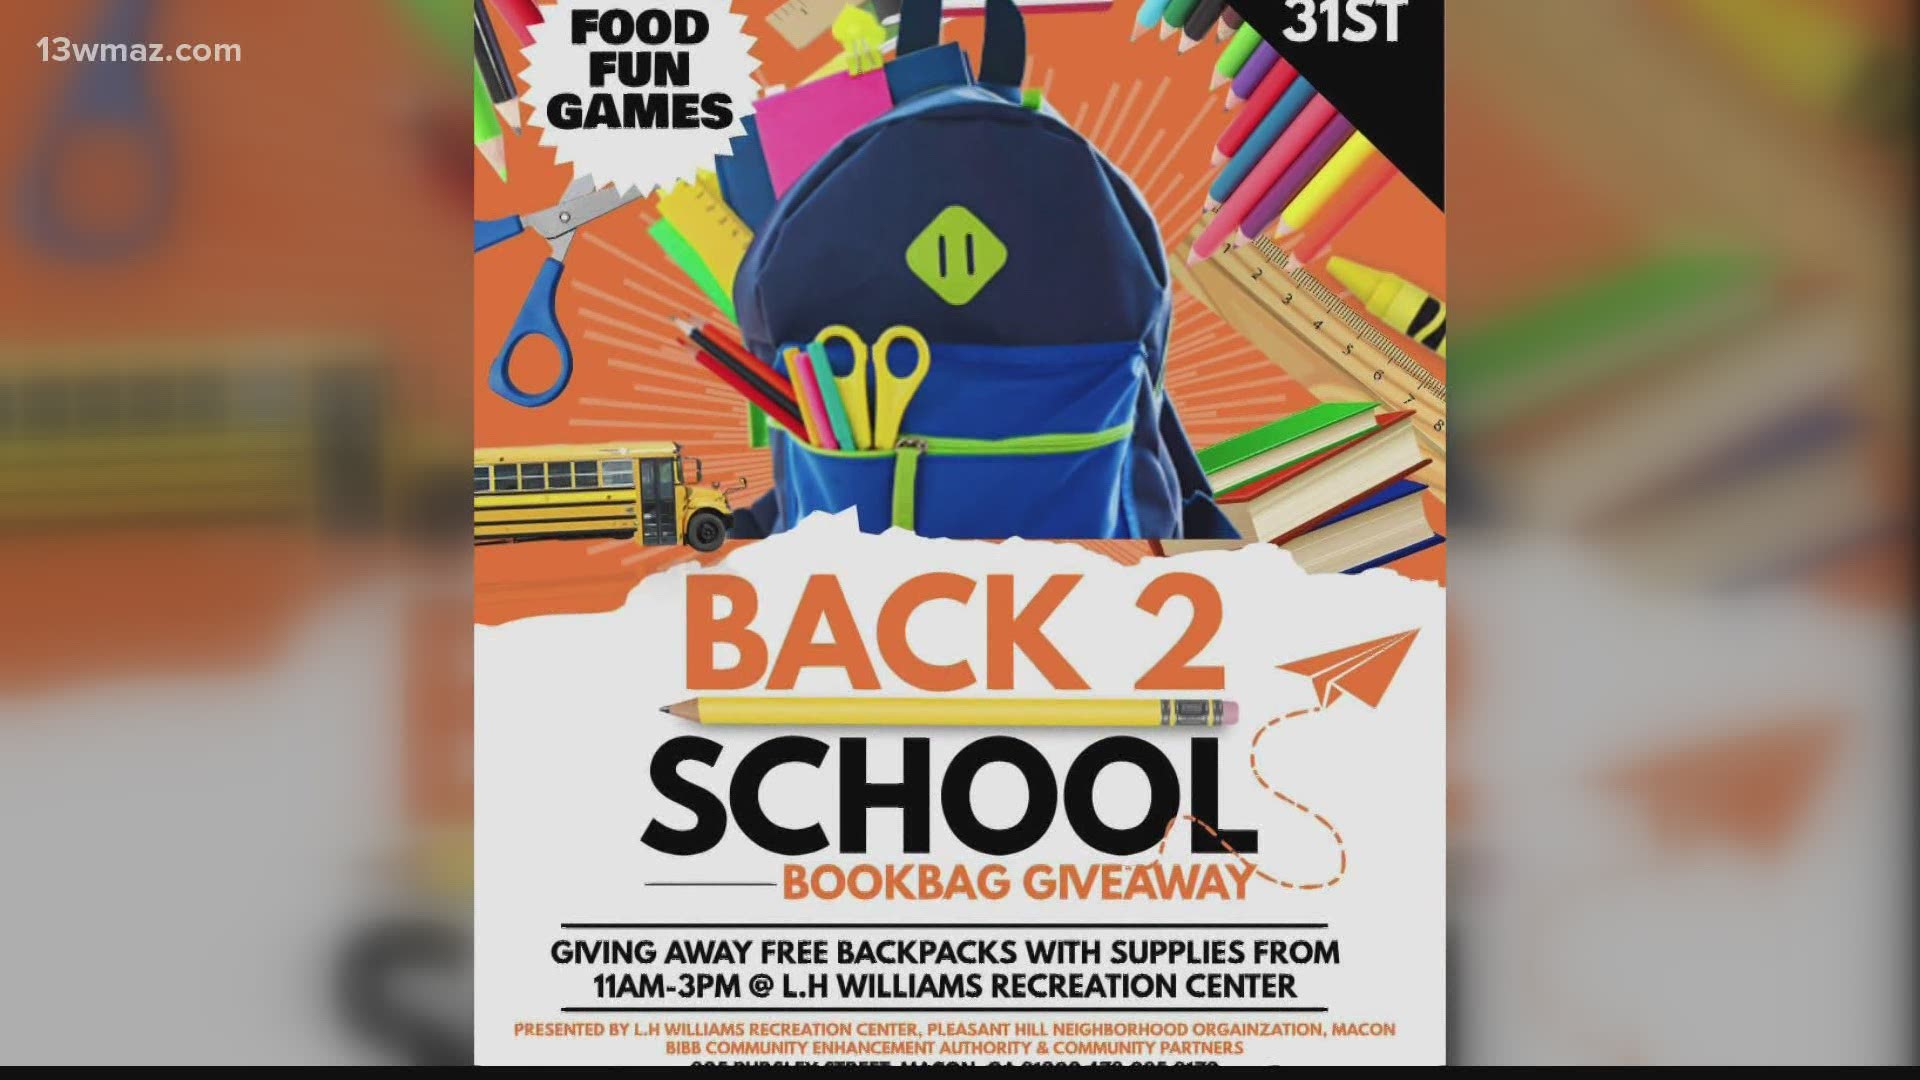 A Macon neighborhood recreation center will be helping kids head back to school this weekend.